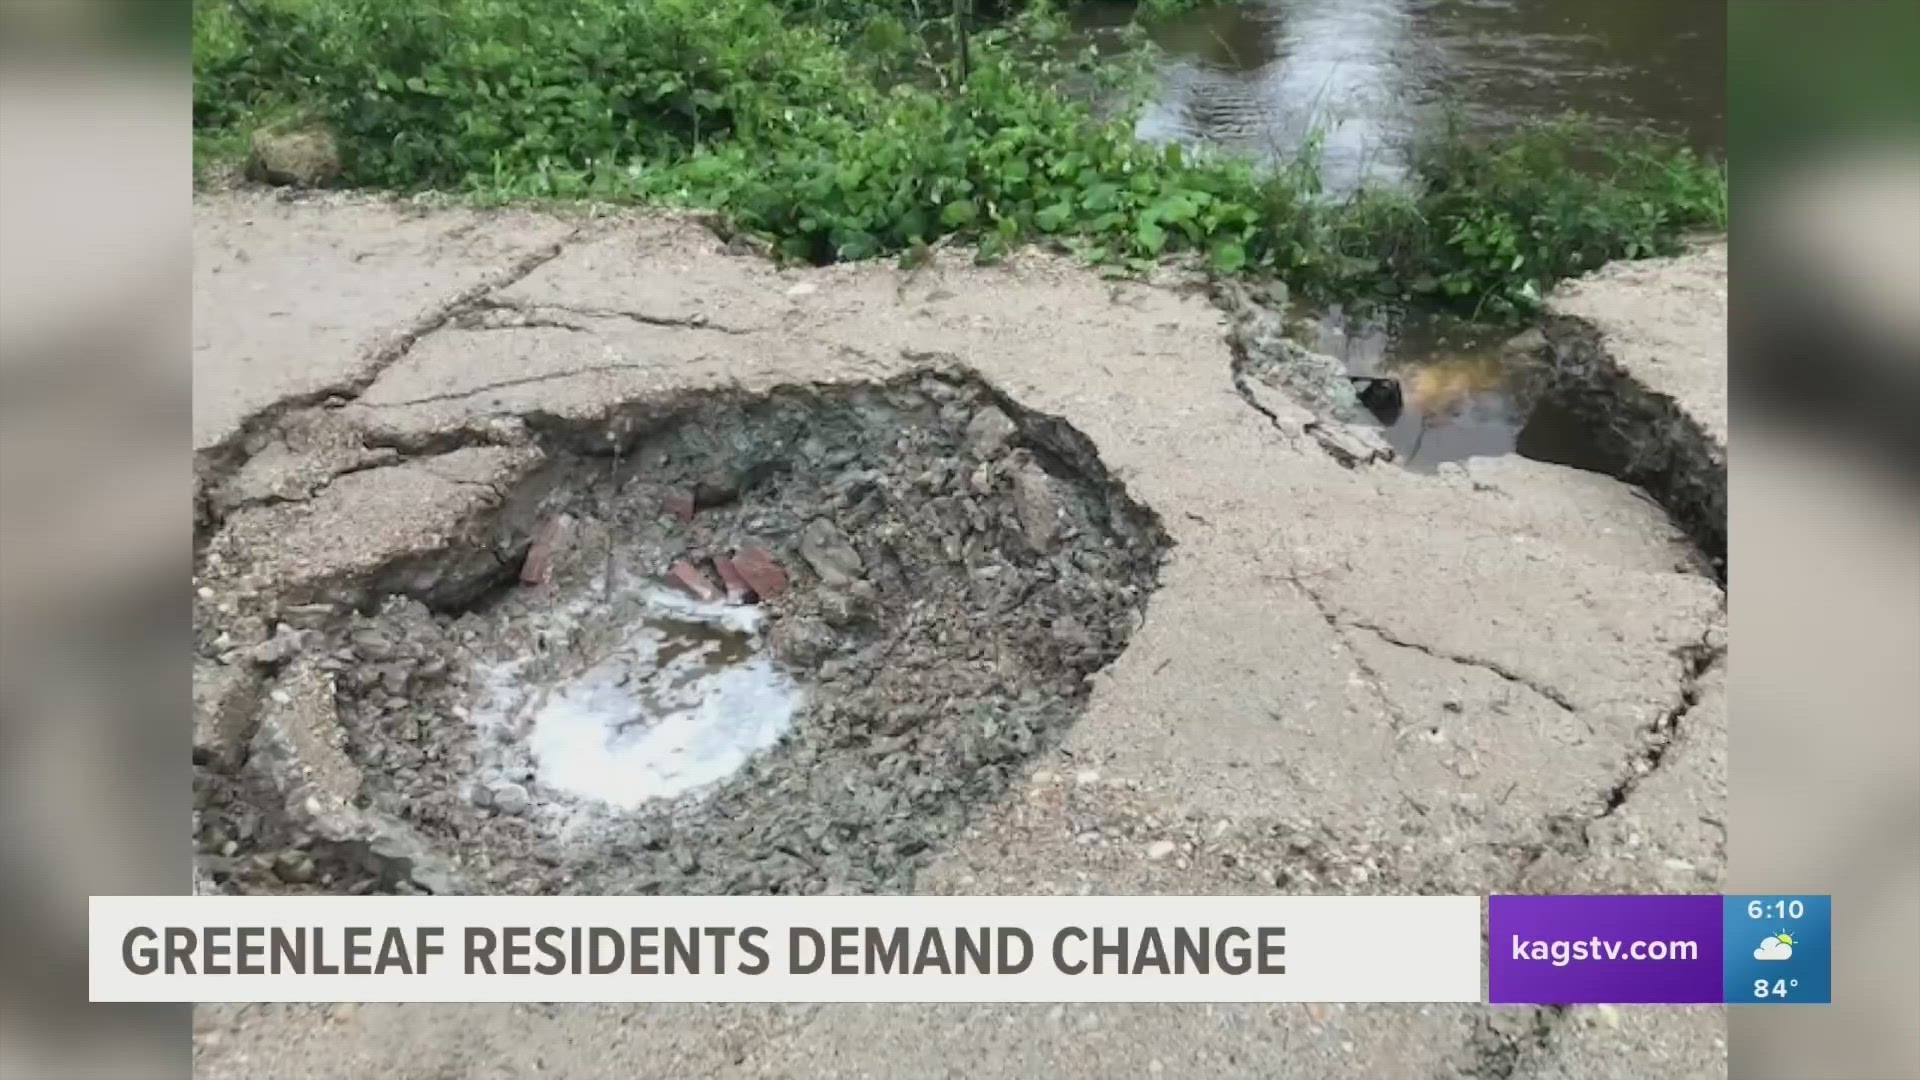 At today's commissioner's court meeting, Greenleaf Lane residents once again called on commissioners to take action on an essential eroding road.